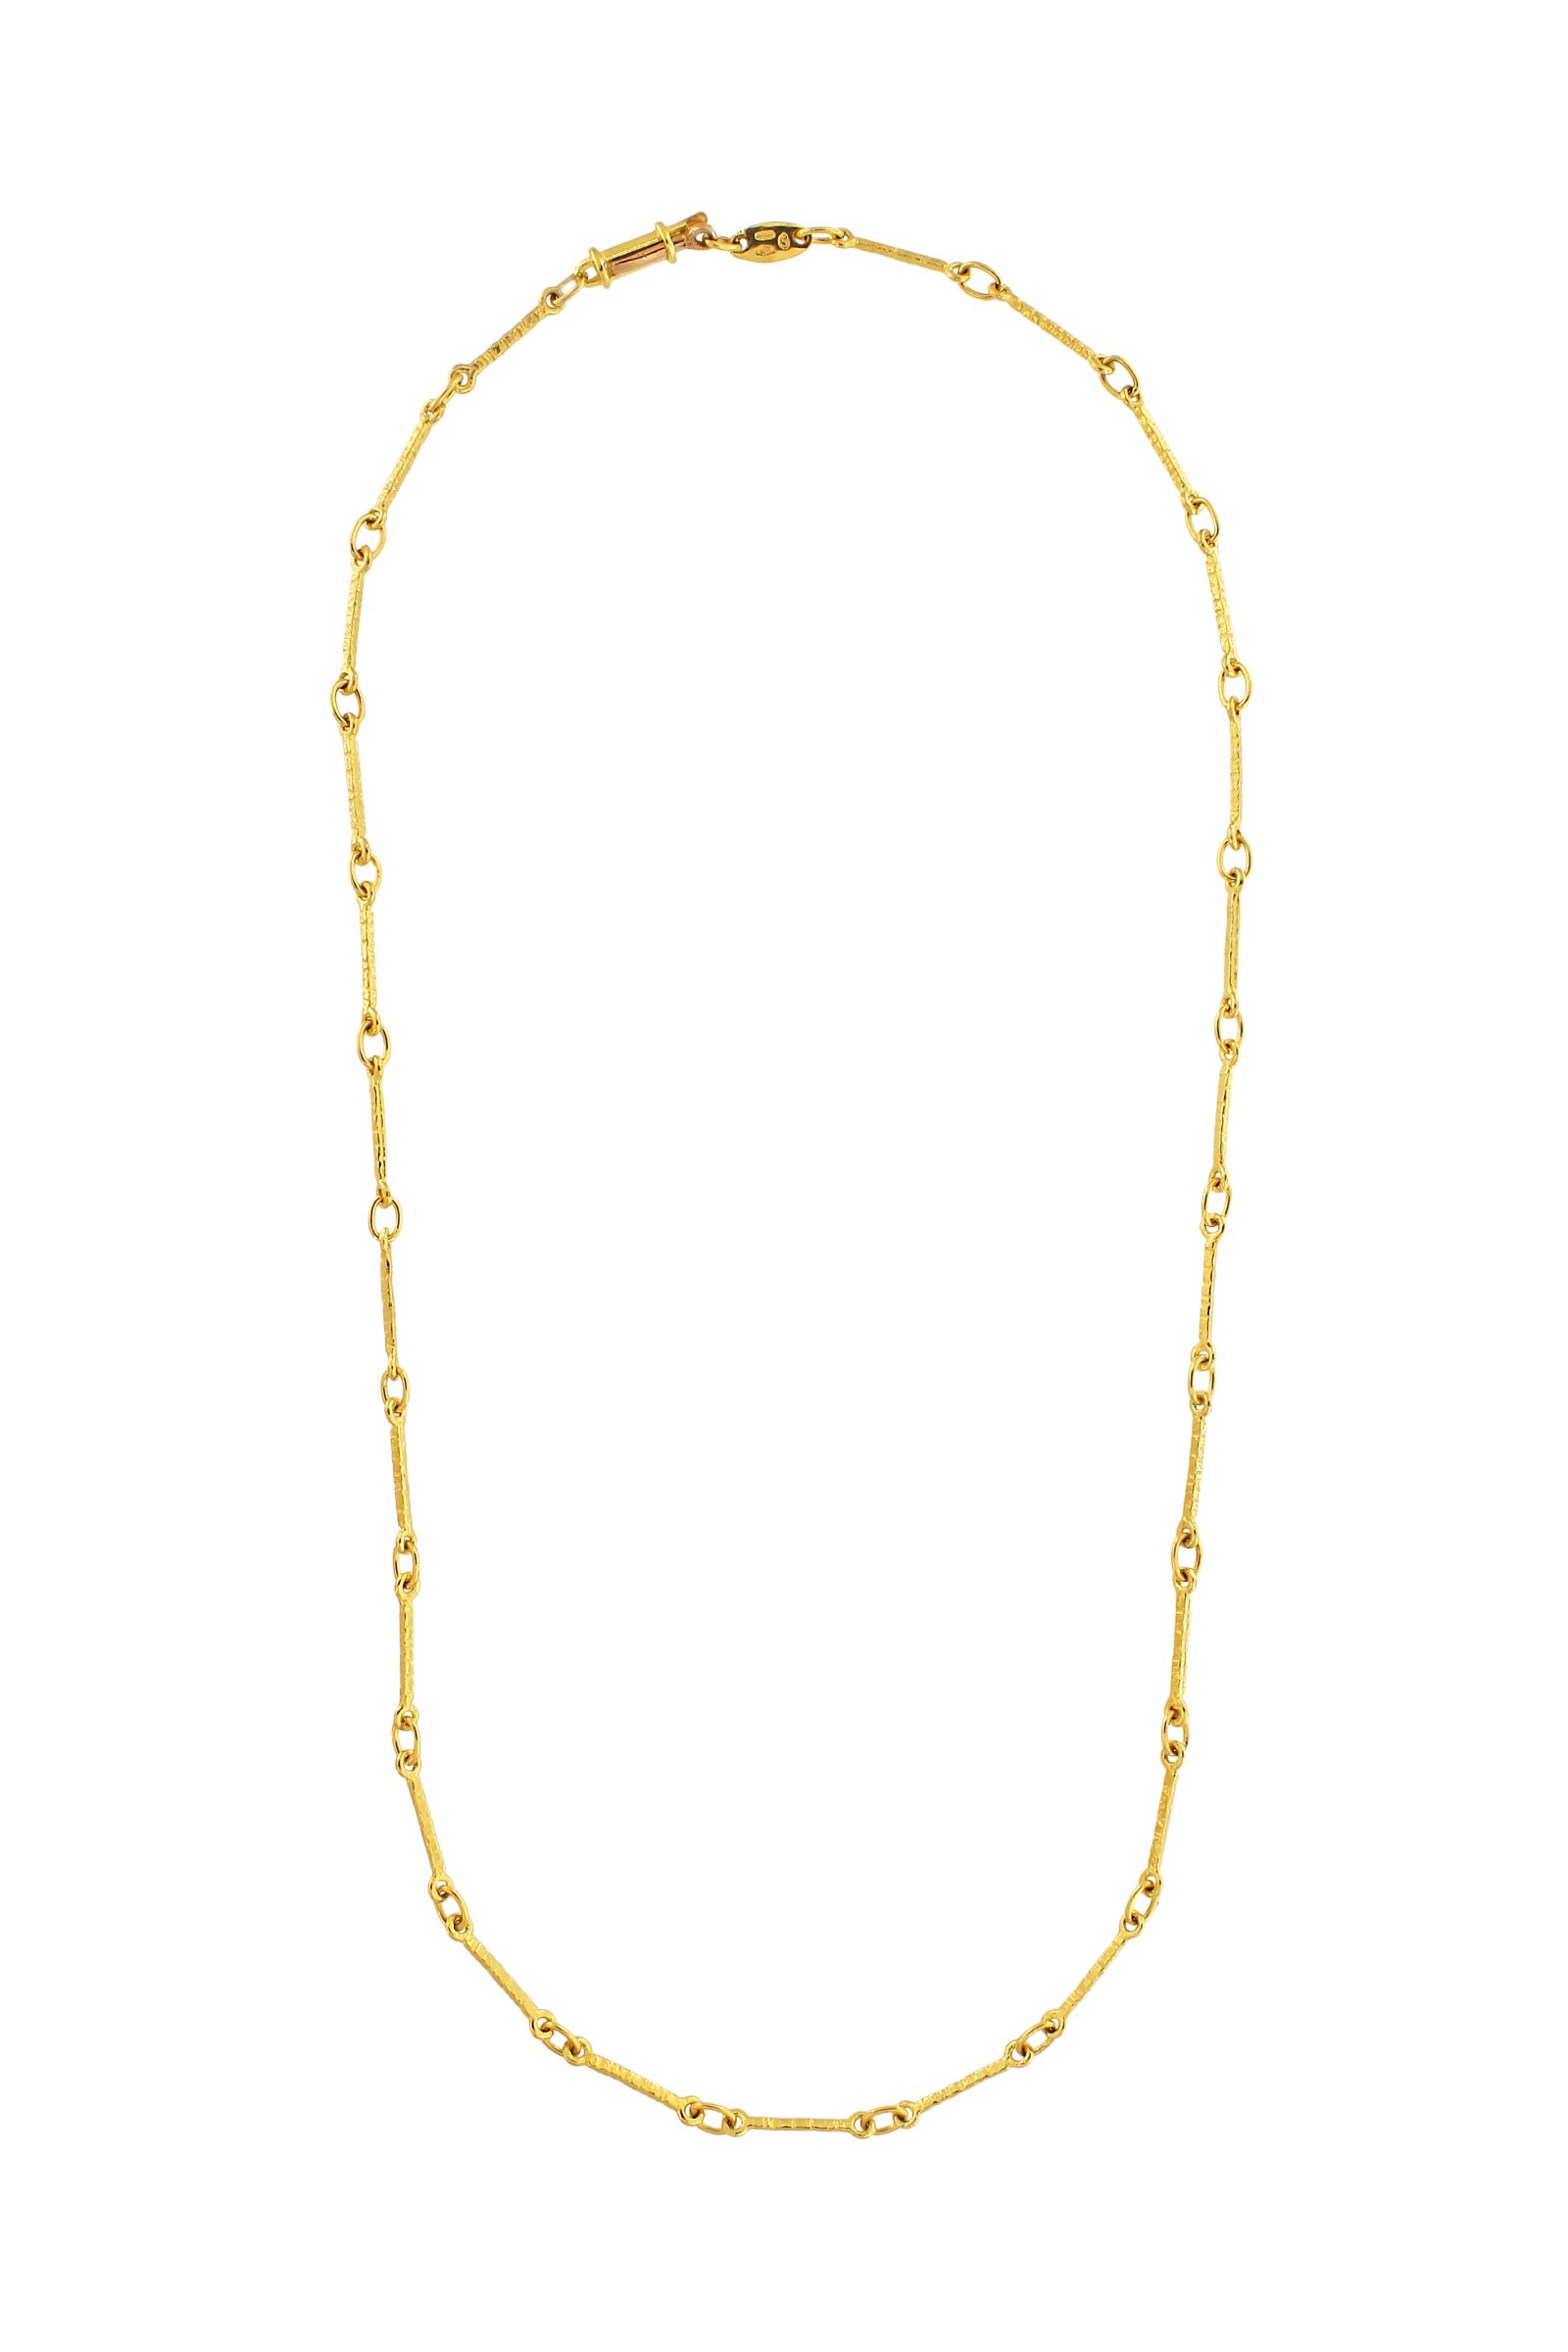 SA207A-18-Kt-Yellow-Gold-Chain-Necklace-1